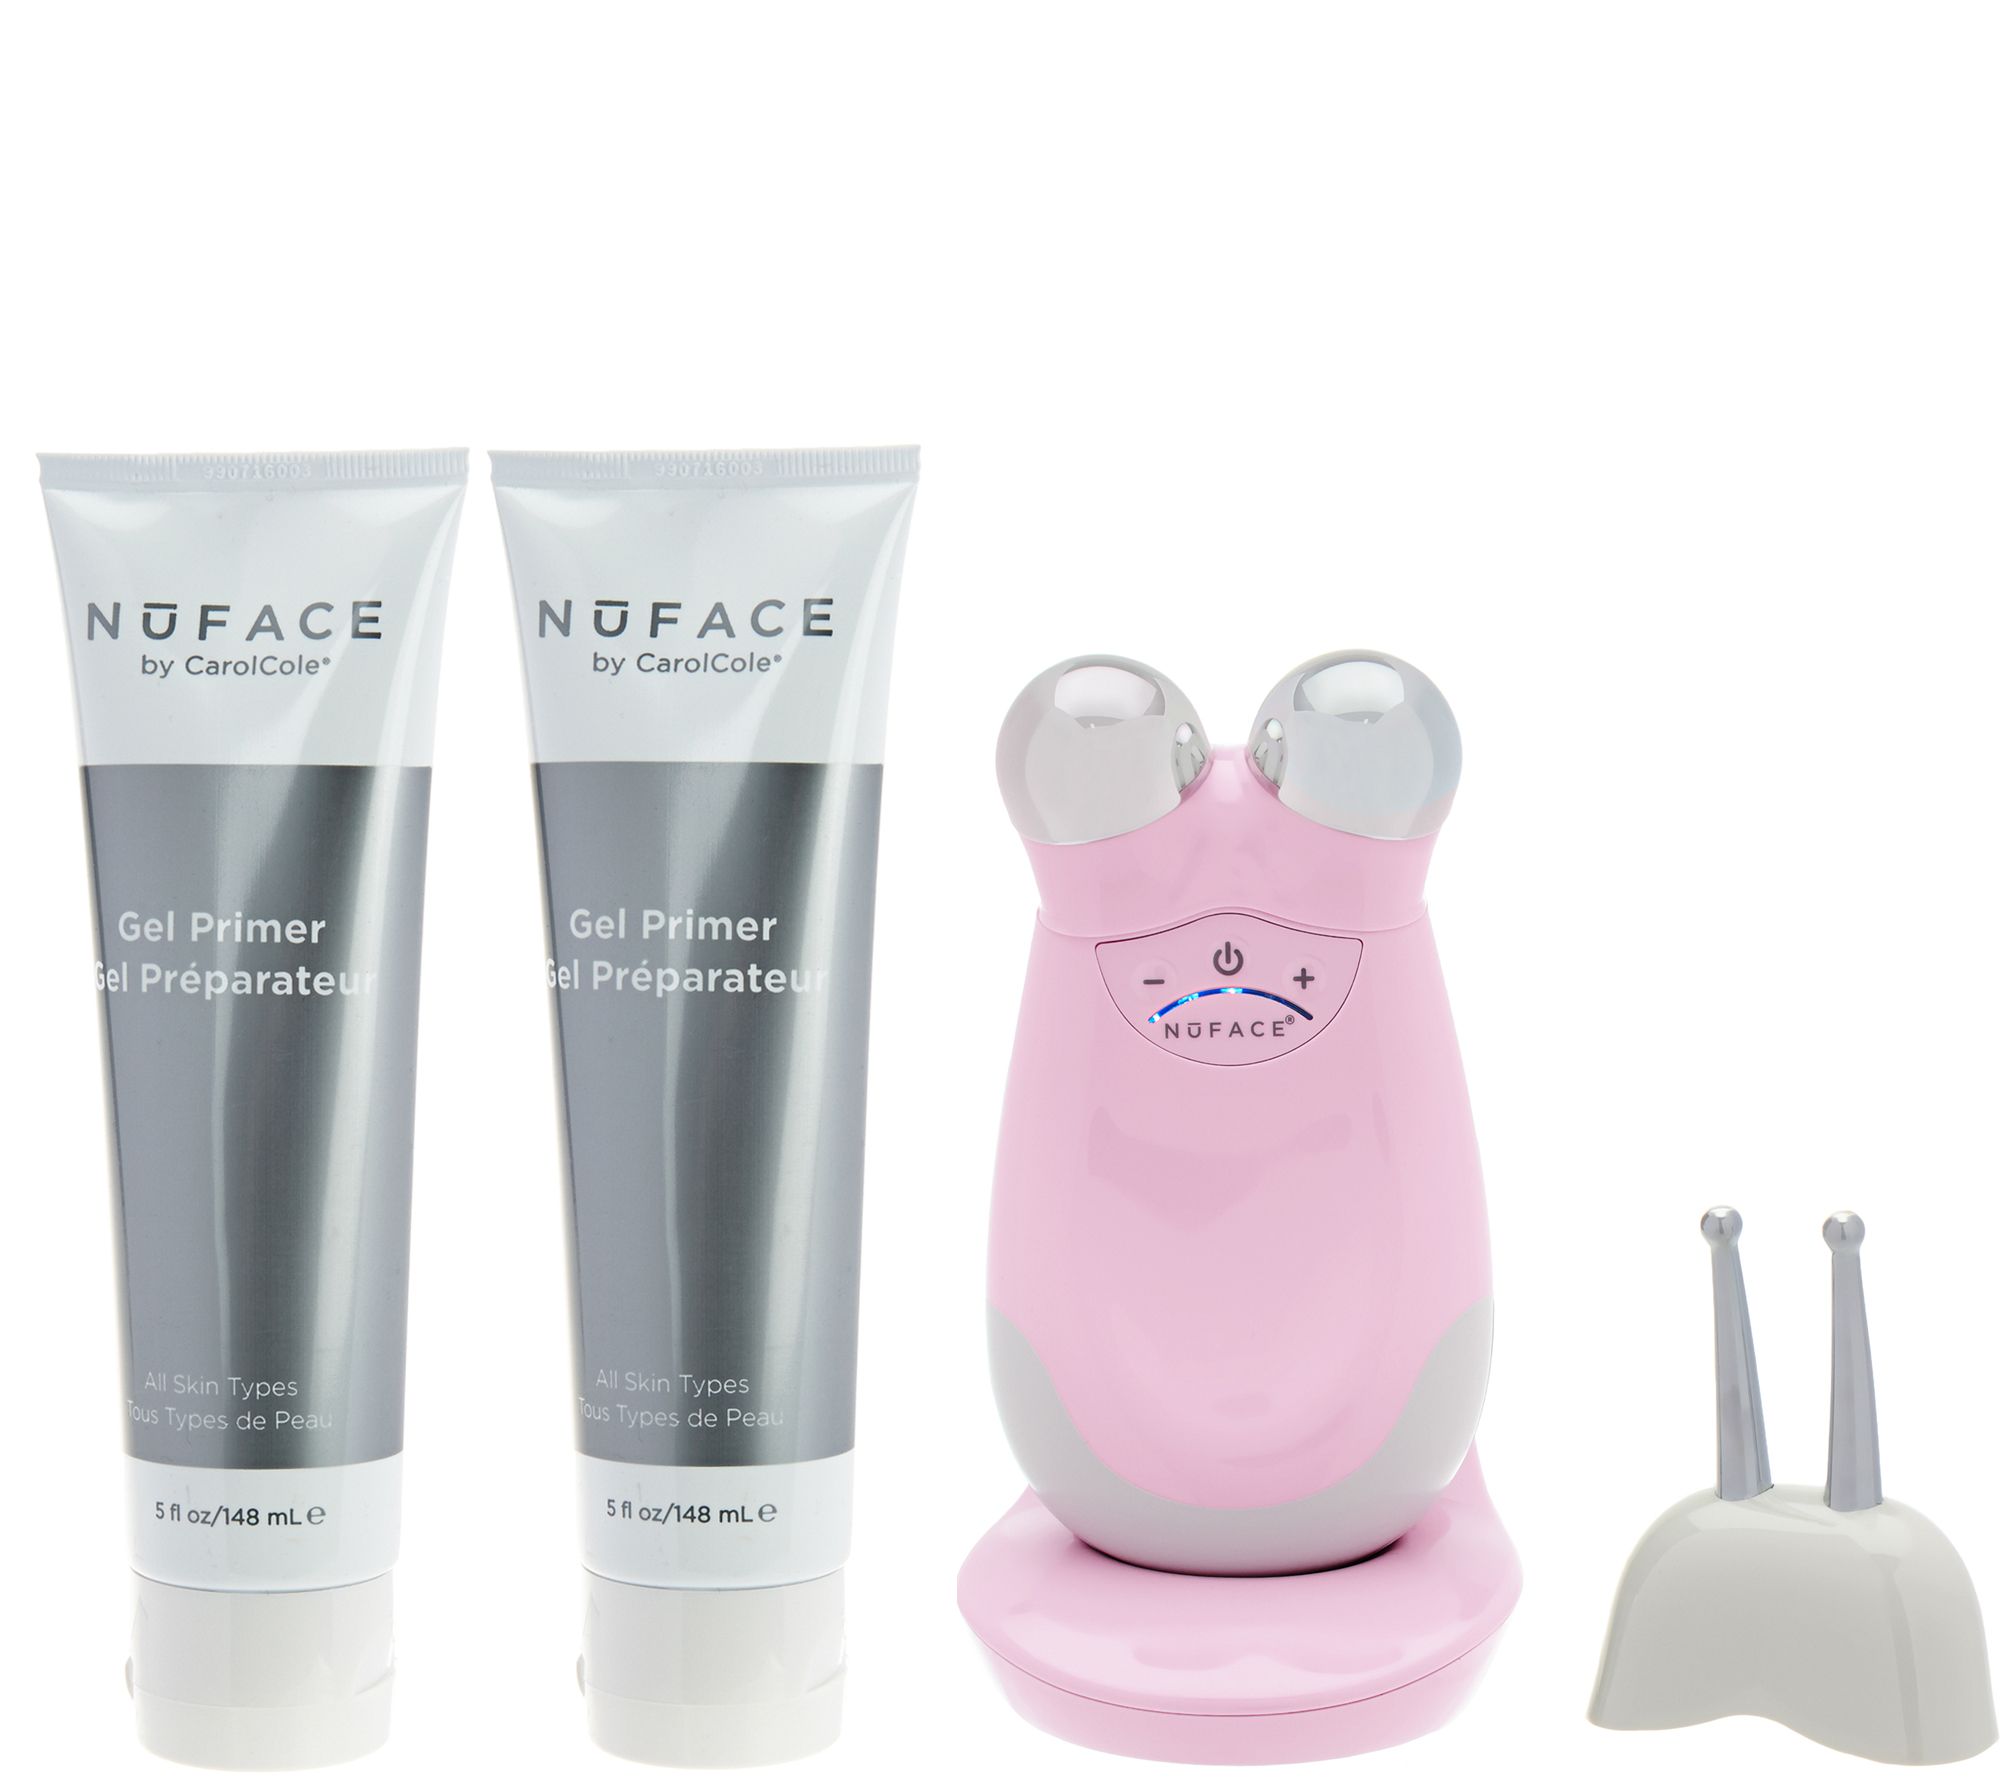 NuFACE Trinity Microcurrent Facial Toning Device with ELE - Page 1